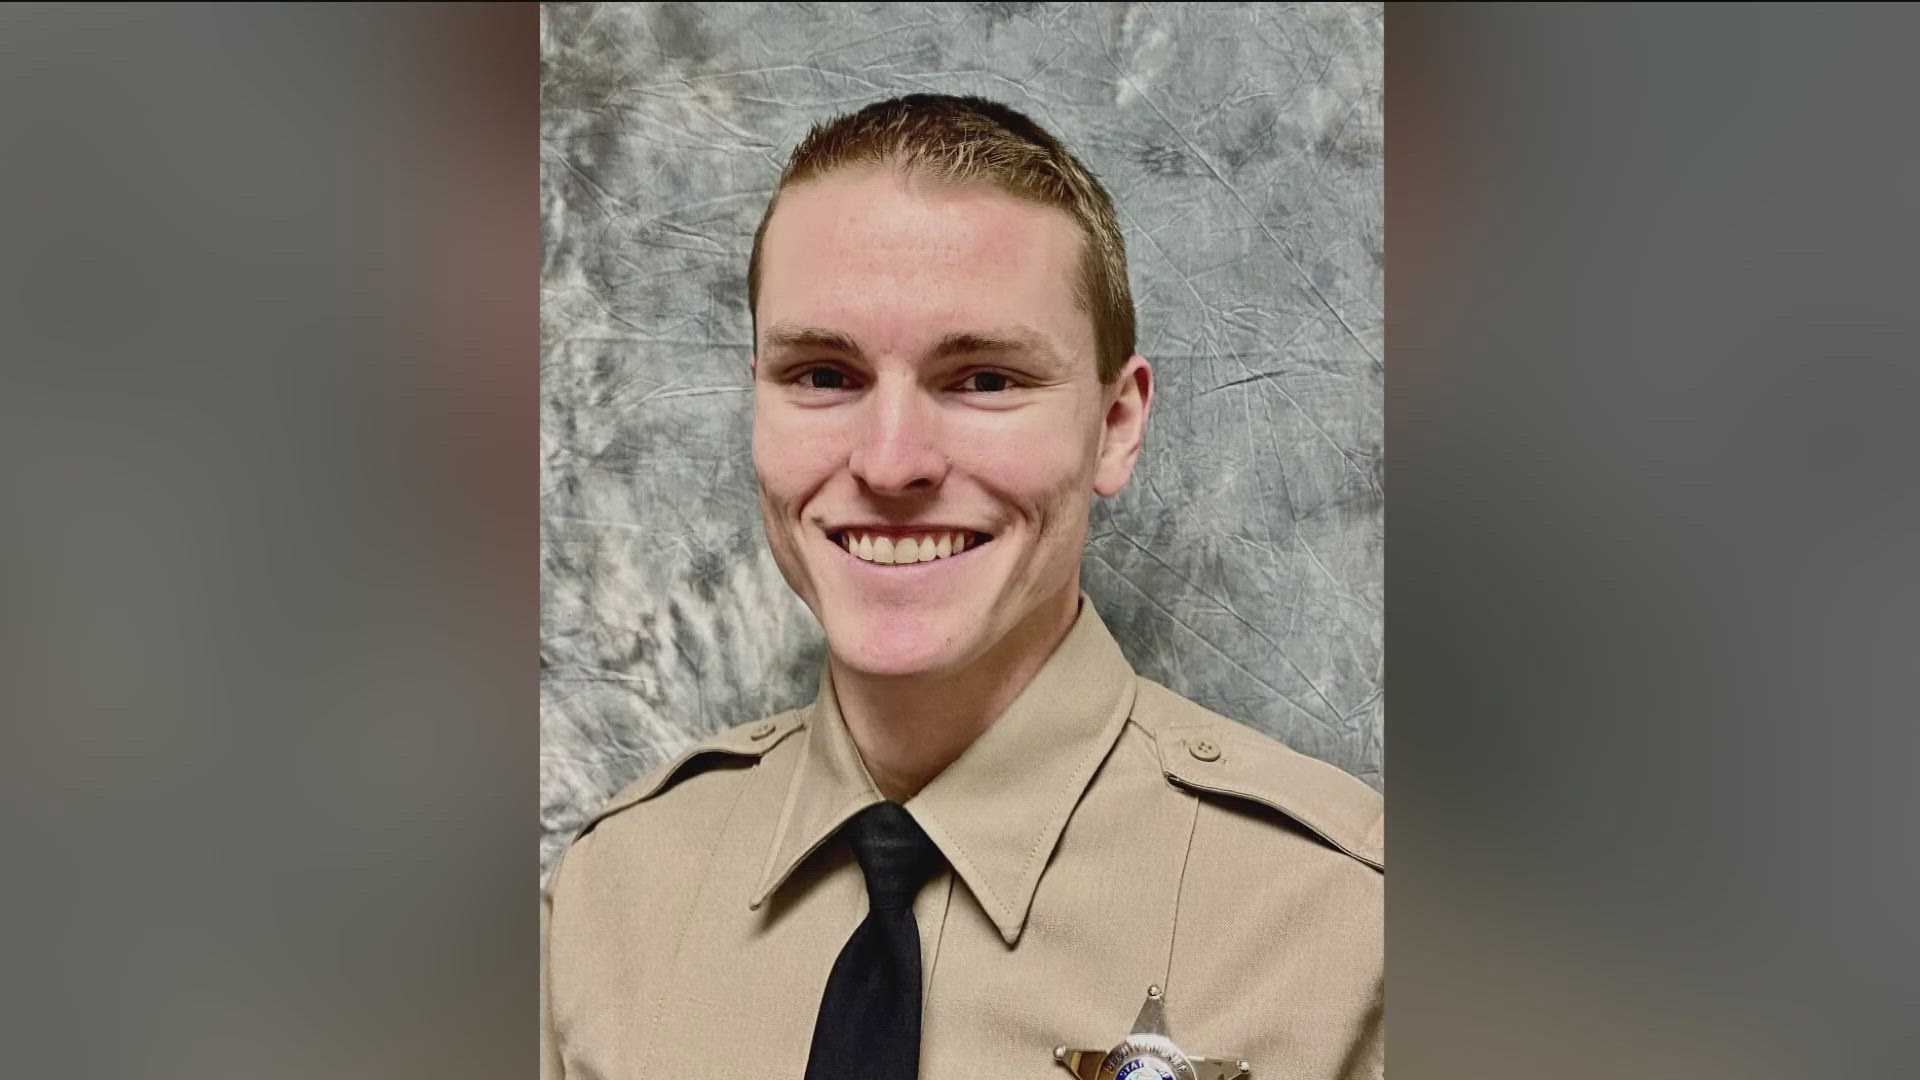 Deputy Tobin Bolter had just joined the sheriff's office in January and is the first Ada County Sheriff's deputy killed in the line of duty.